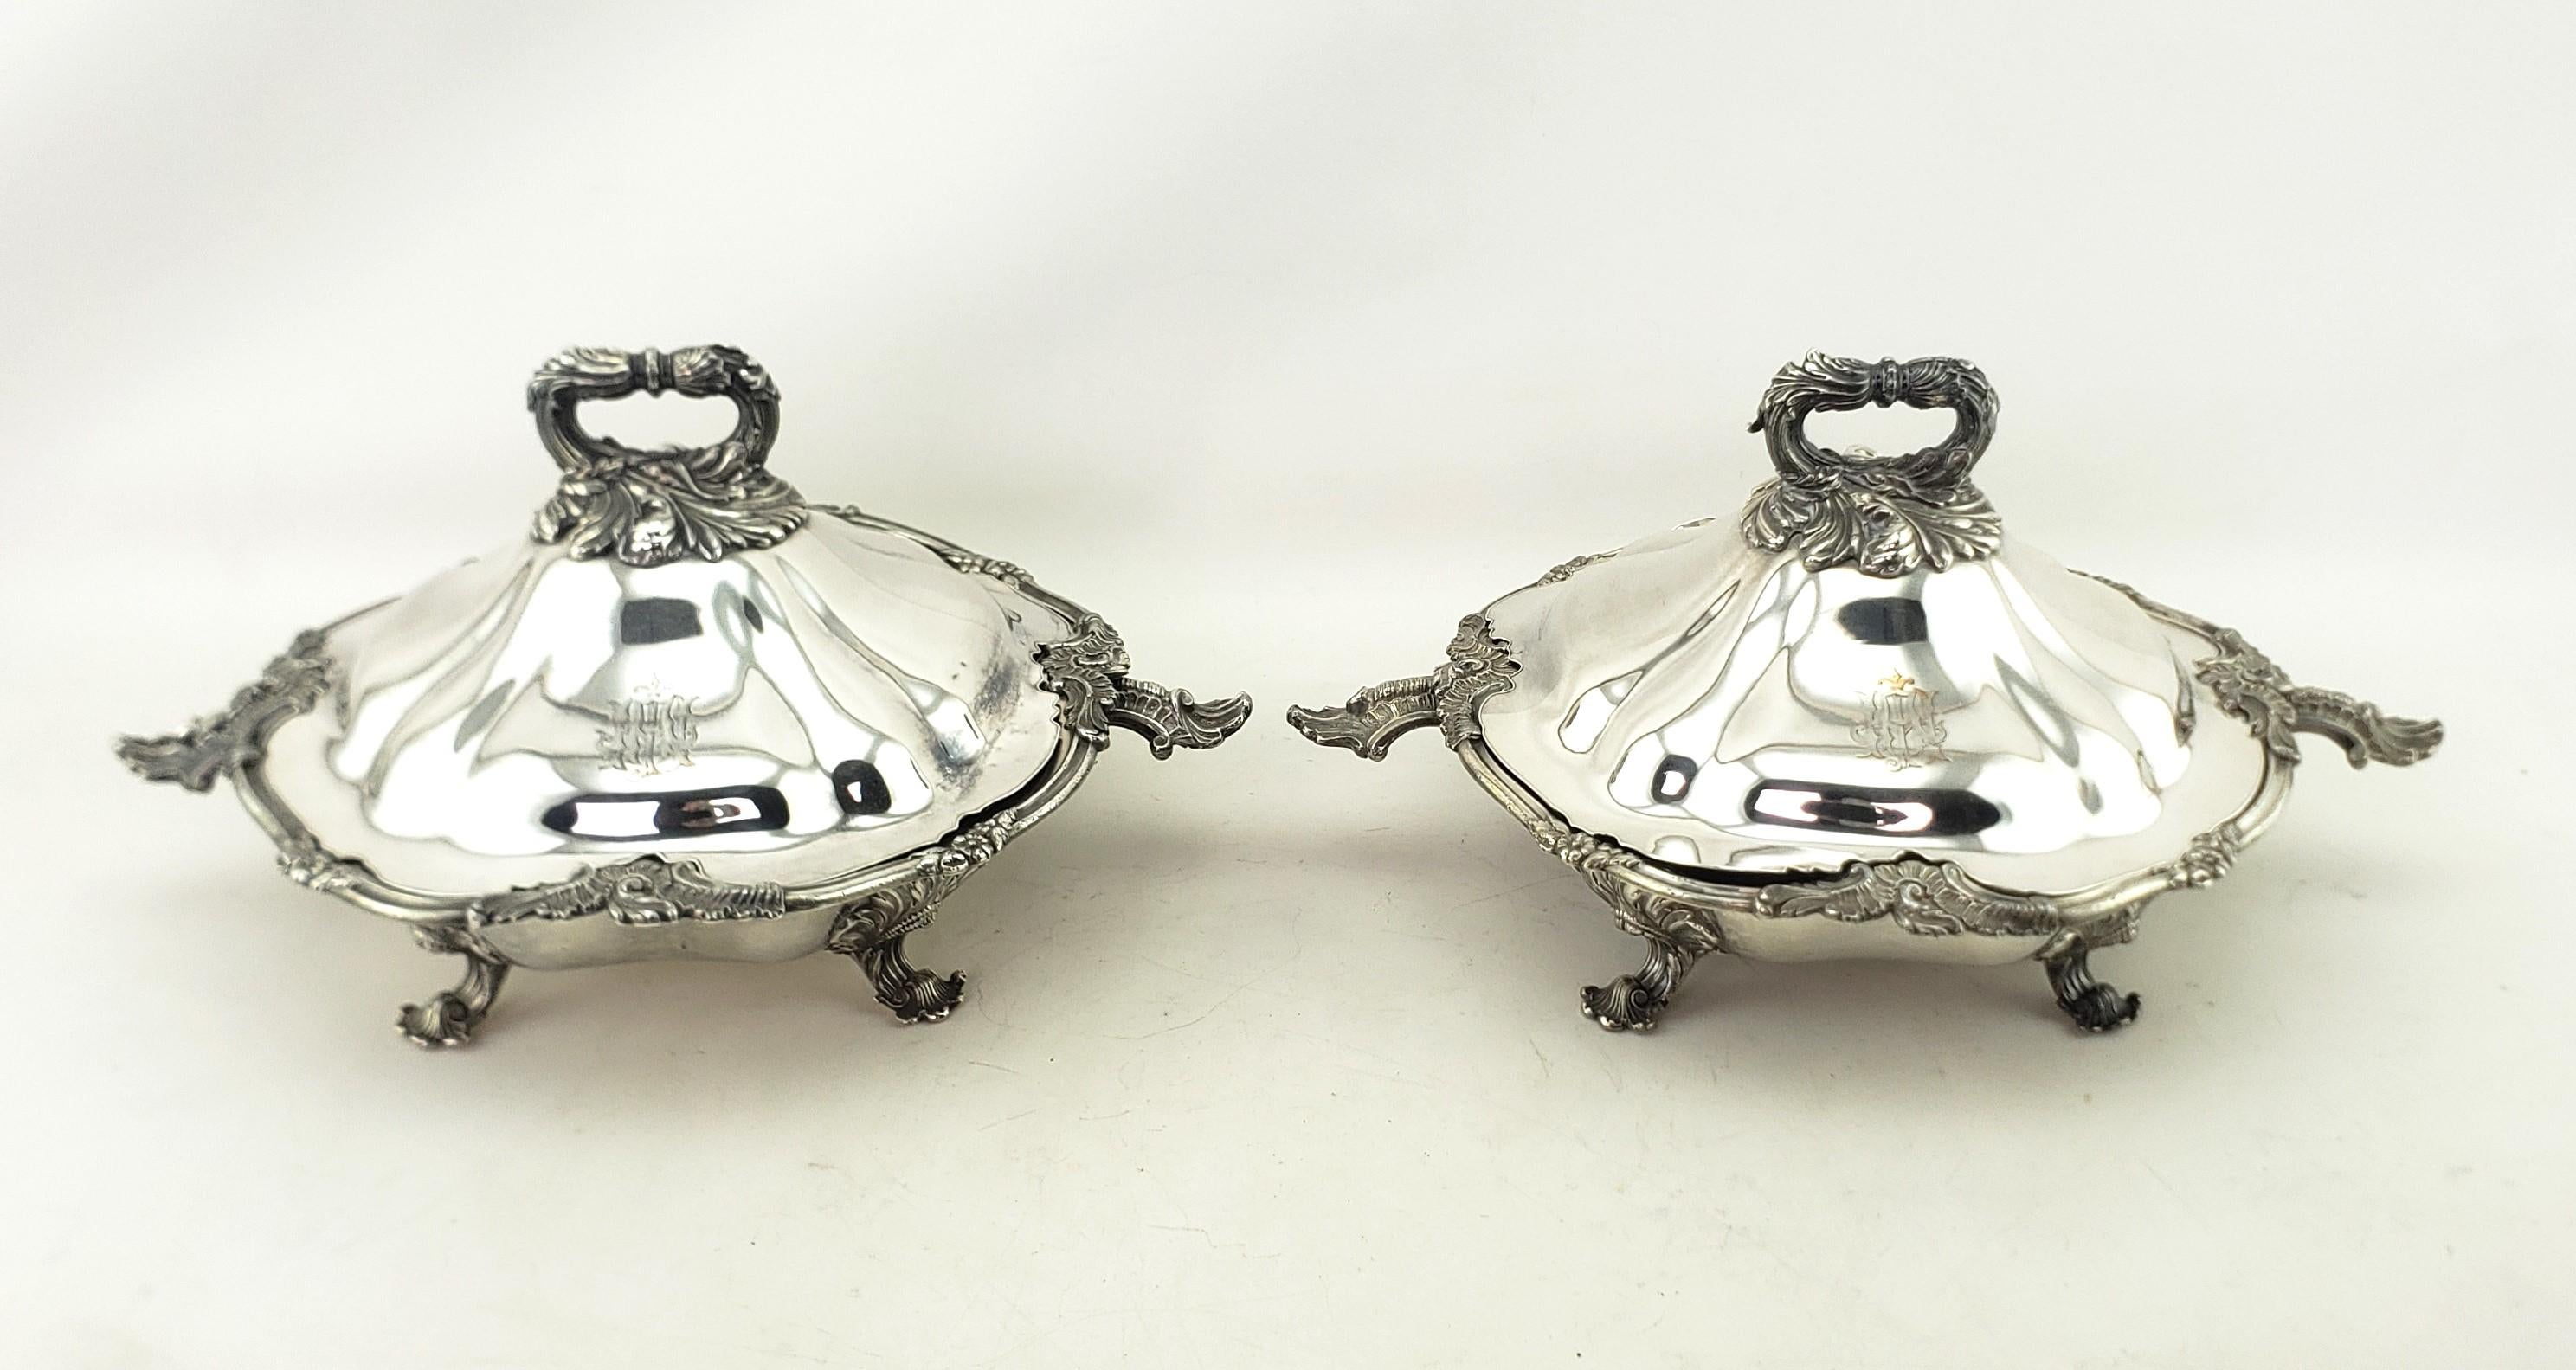 Three Antique Georgian Sheffield Plated Covered Tureens with Floral Decoration For Sale 7